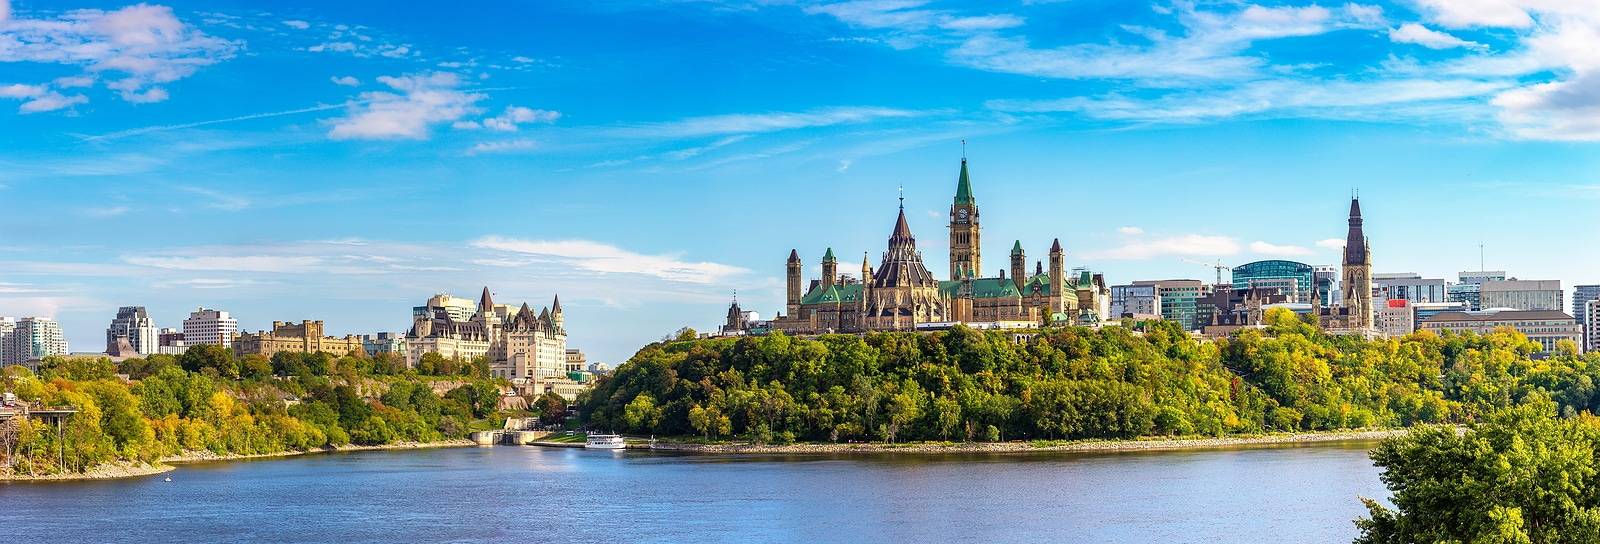 Panorama of Canadian Parliament in Ottawa and river in a sunny day, Canada